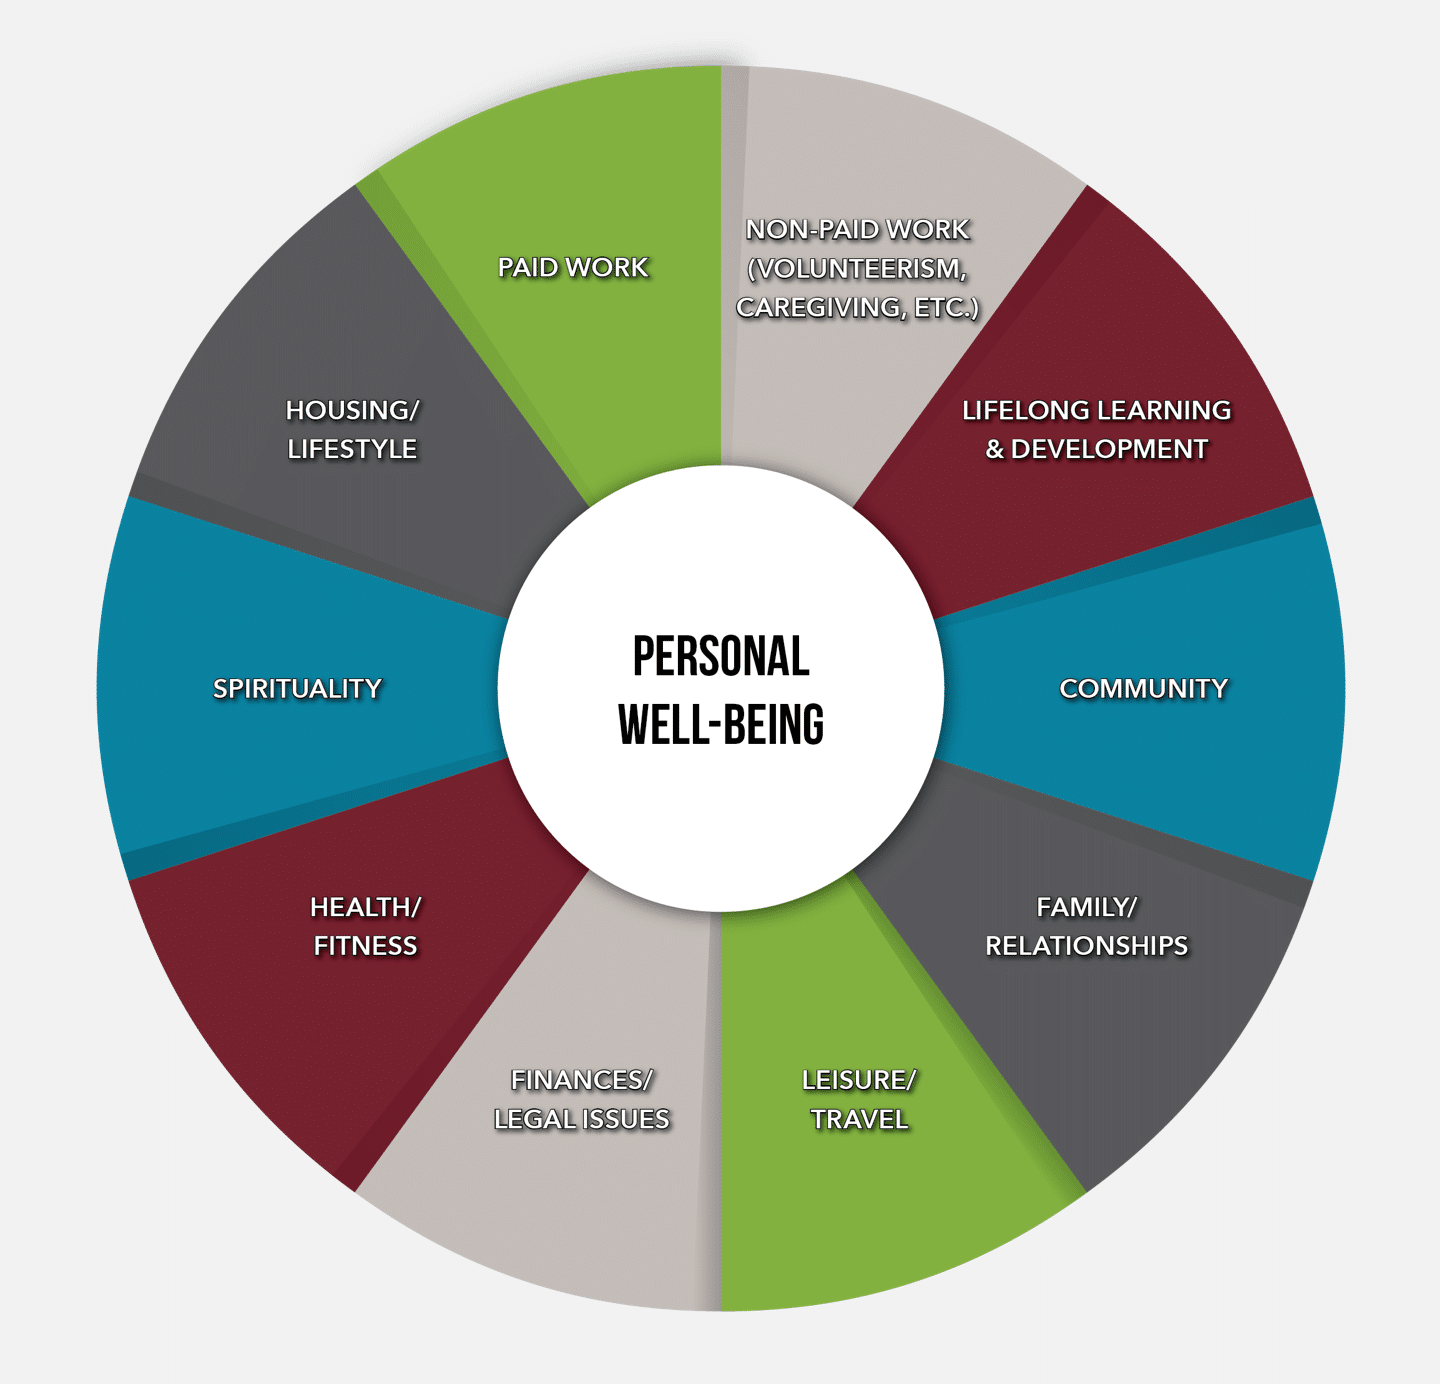 Pie chart on personal well-being. The parts of the pie chart are labeled paid work, non-paid work (volunteerism, caregiving, etc.), lifelong learning & development, community, family/relationships, leisure/travel, finance/legal issues, health/fitness, spirituality, housing/lifestyle